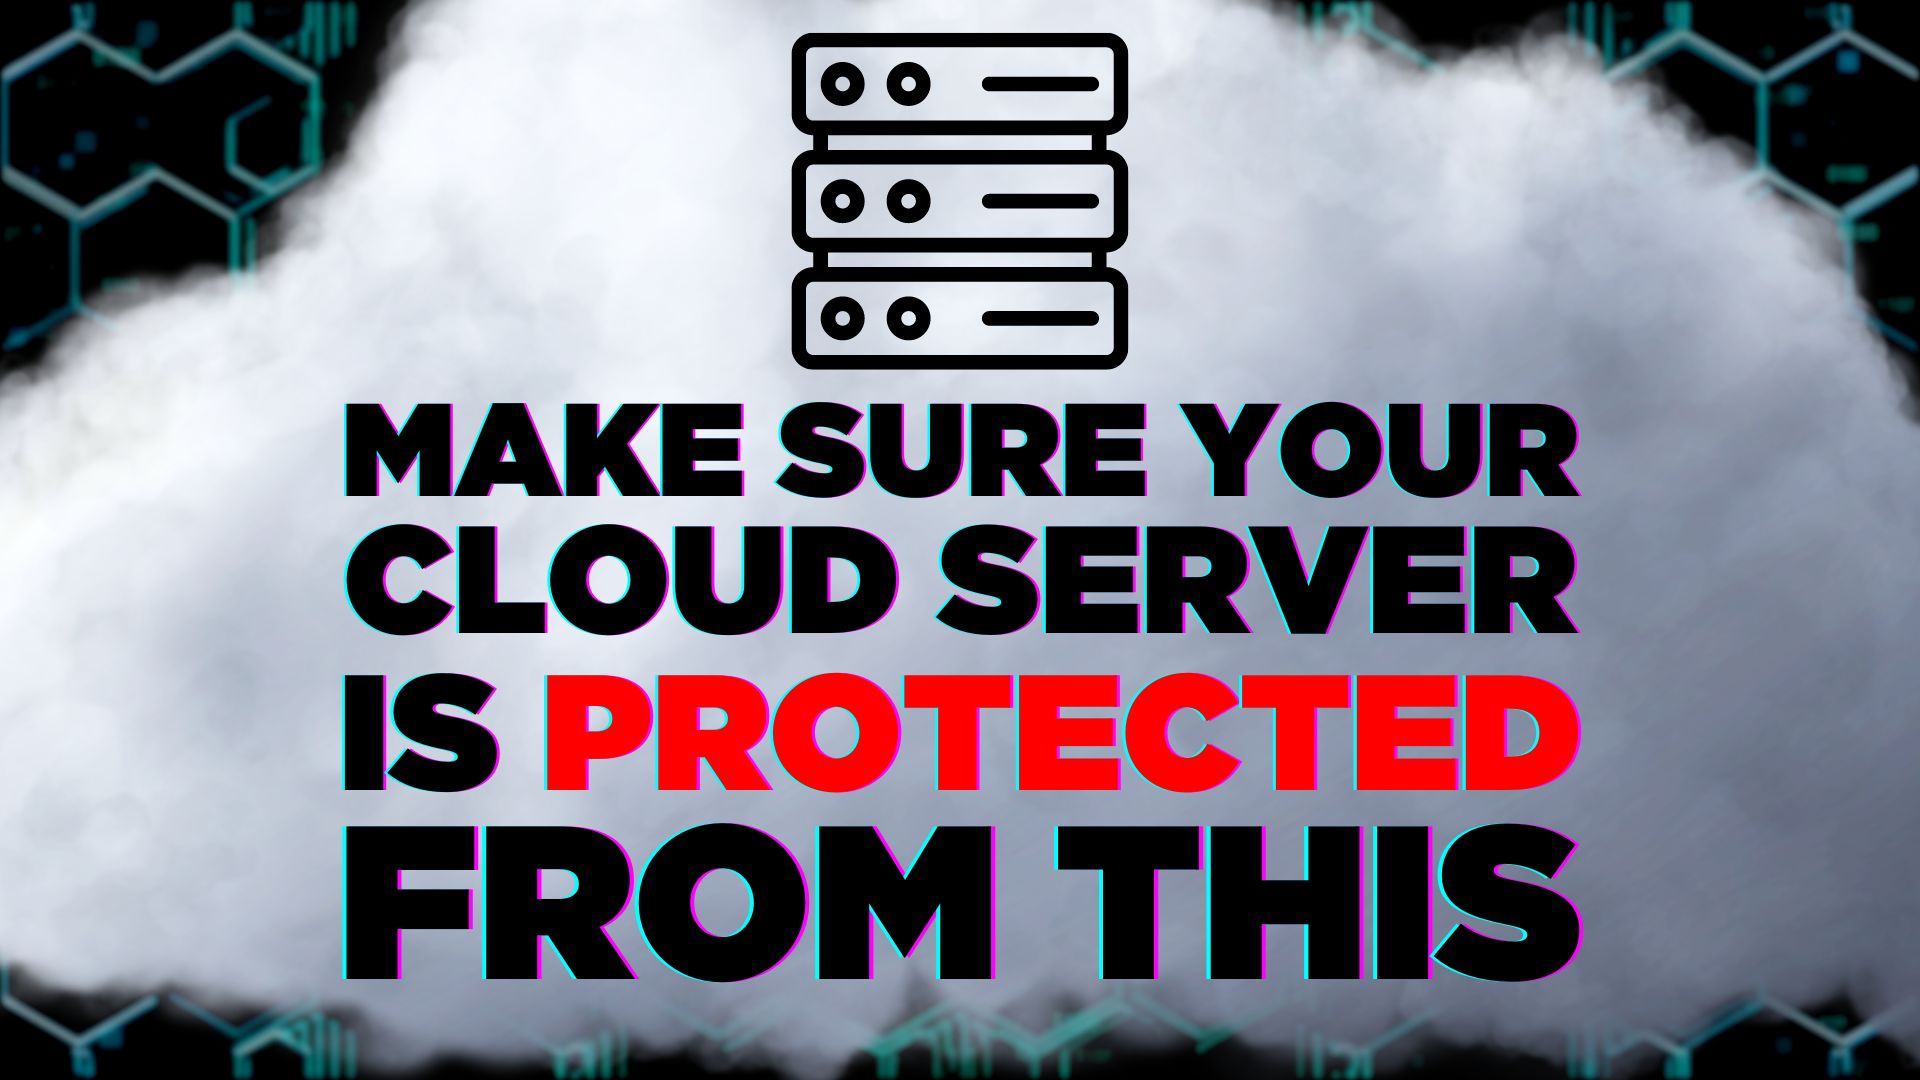 Make sure your cloud server is protected from this